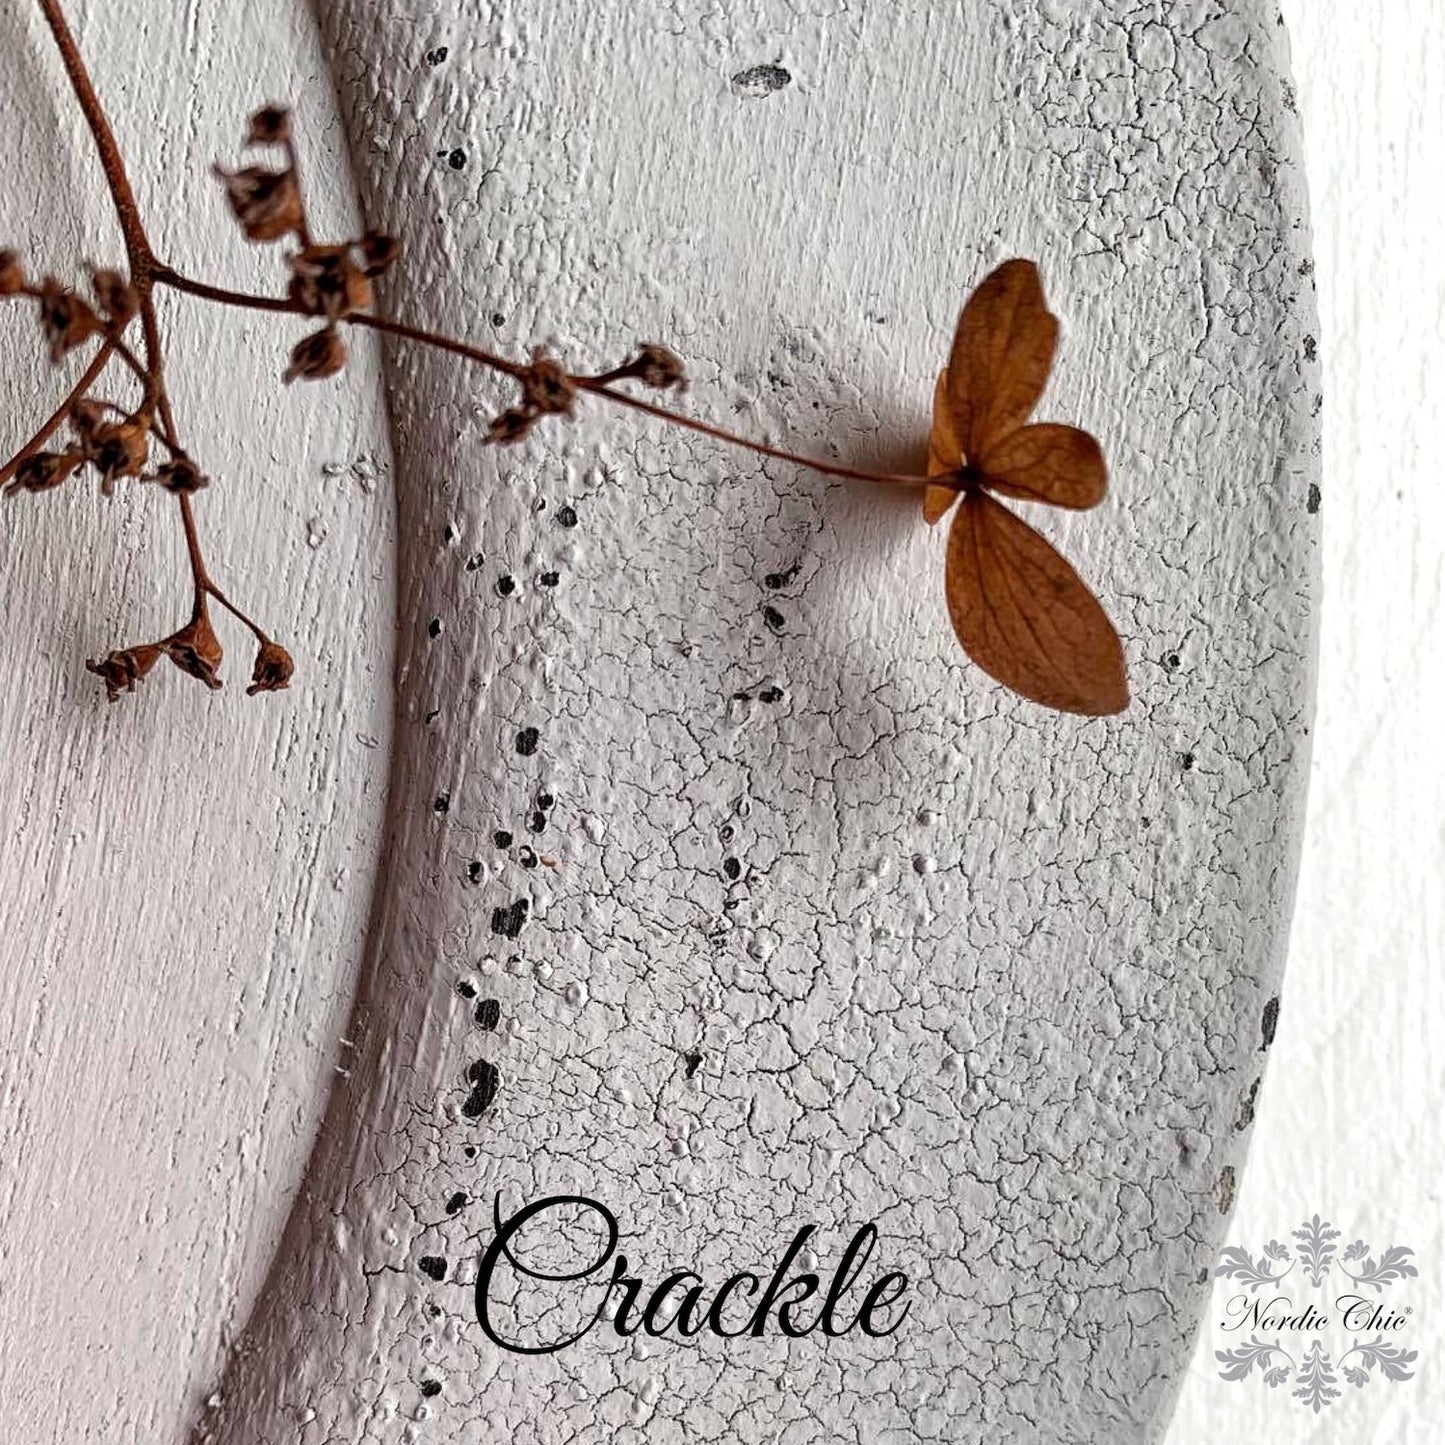 Nordic Chic® Crackle - Nordic Chic®